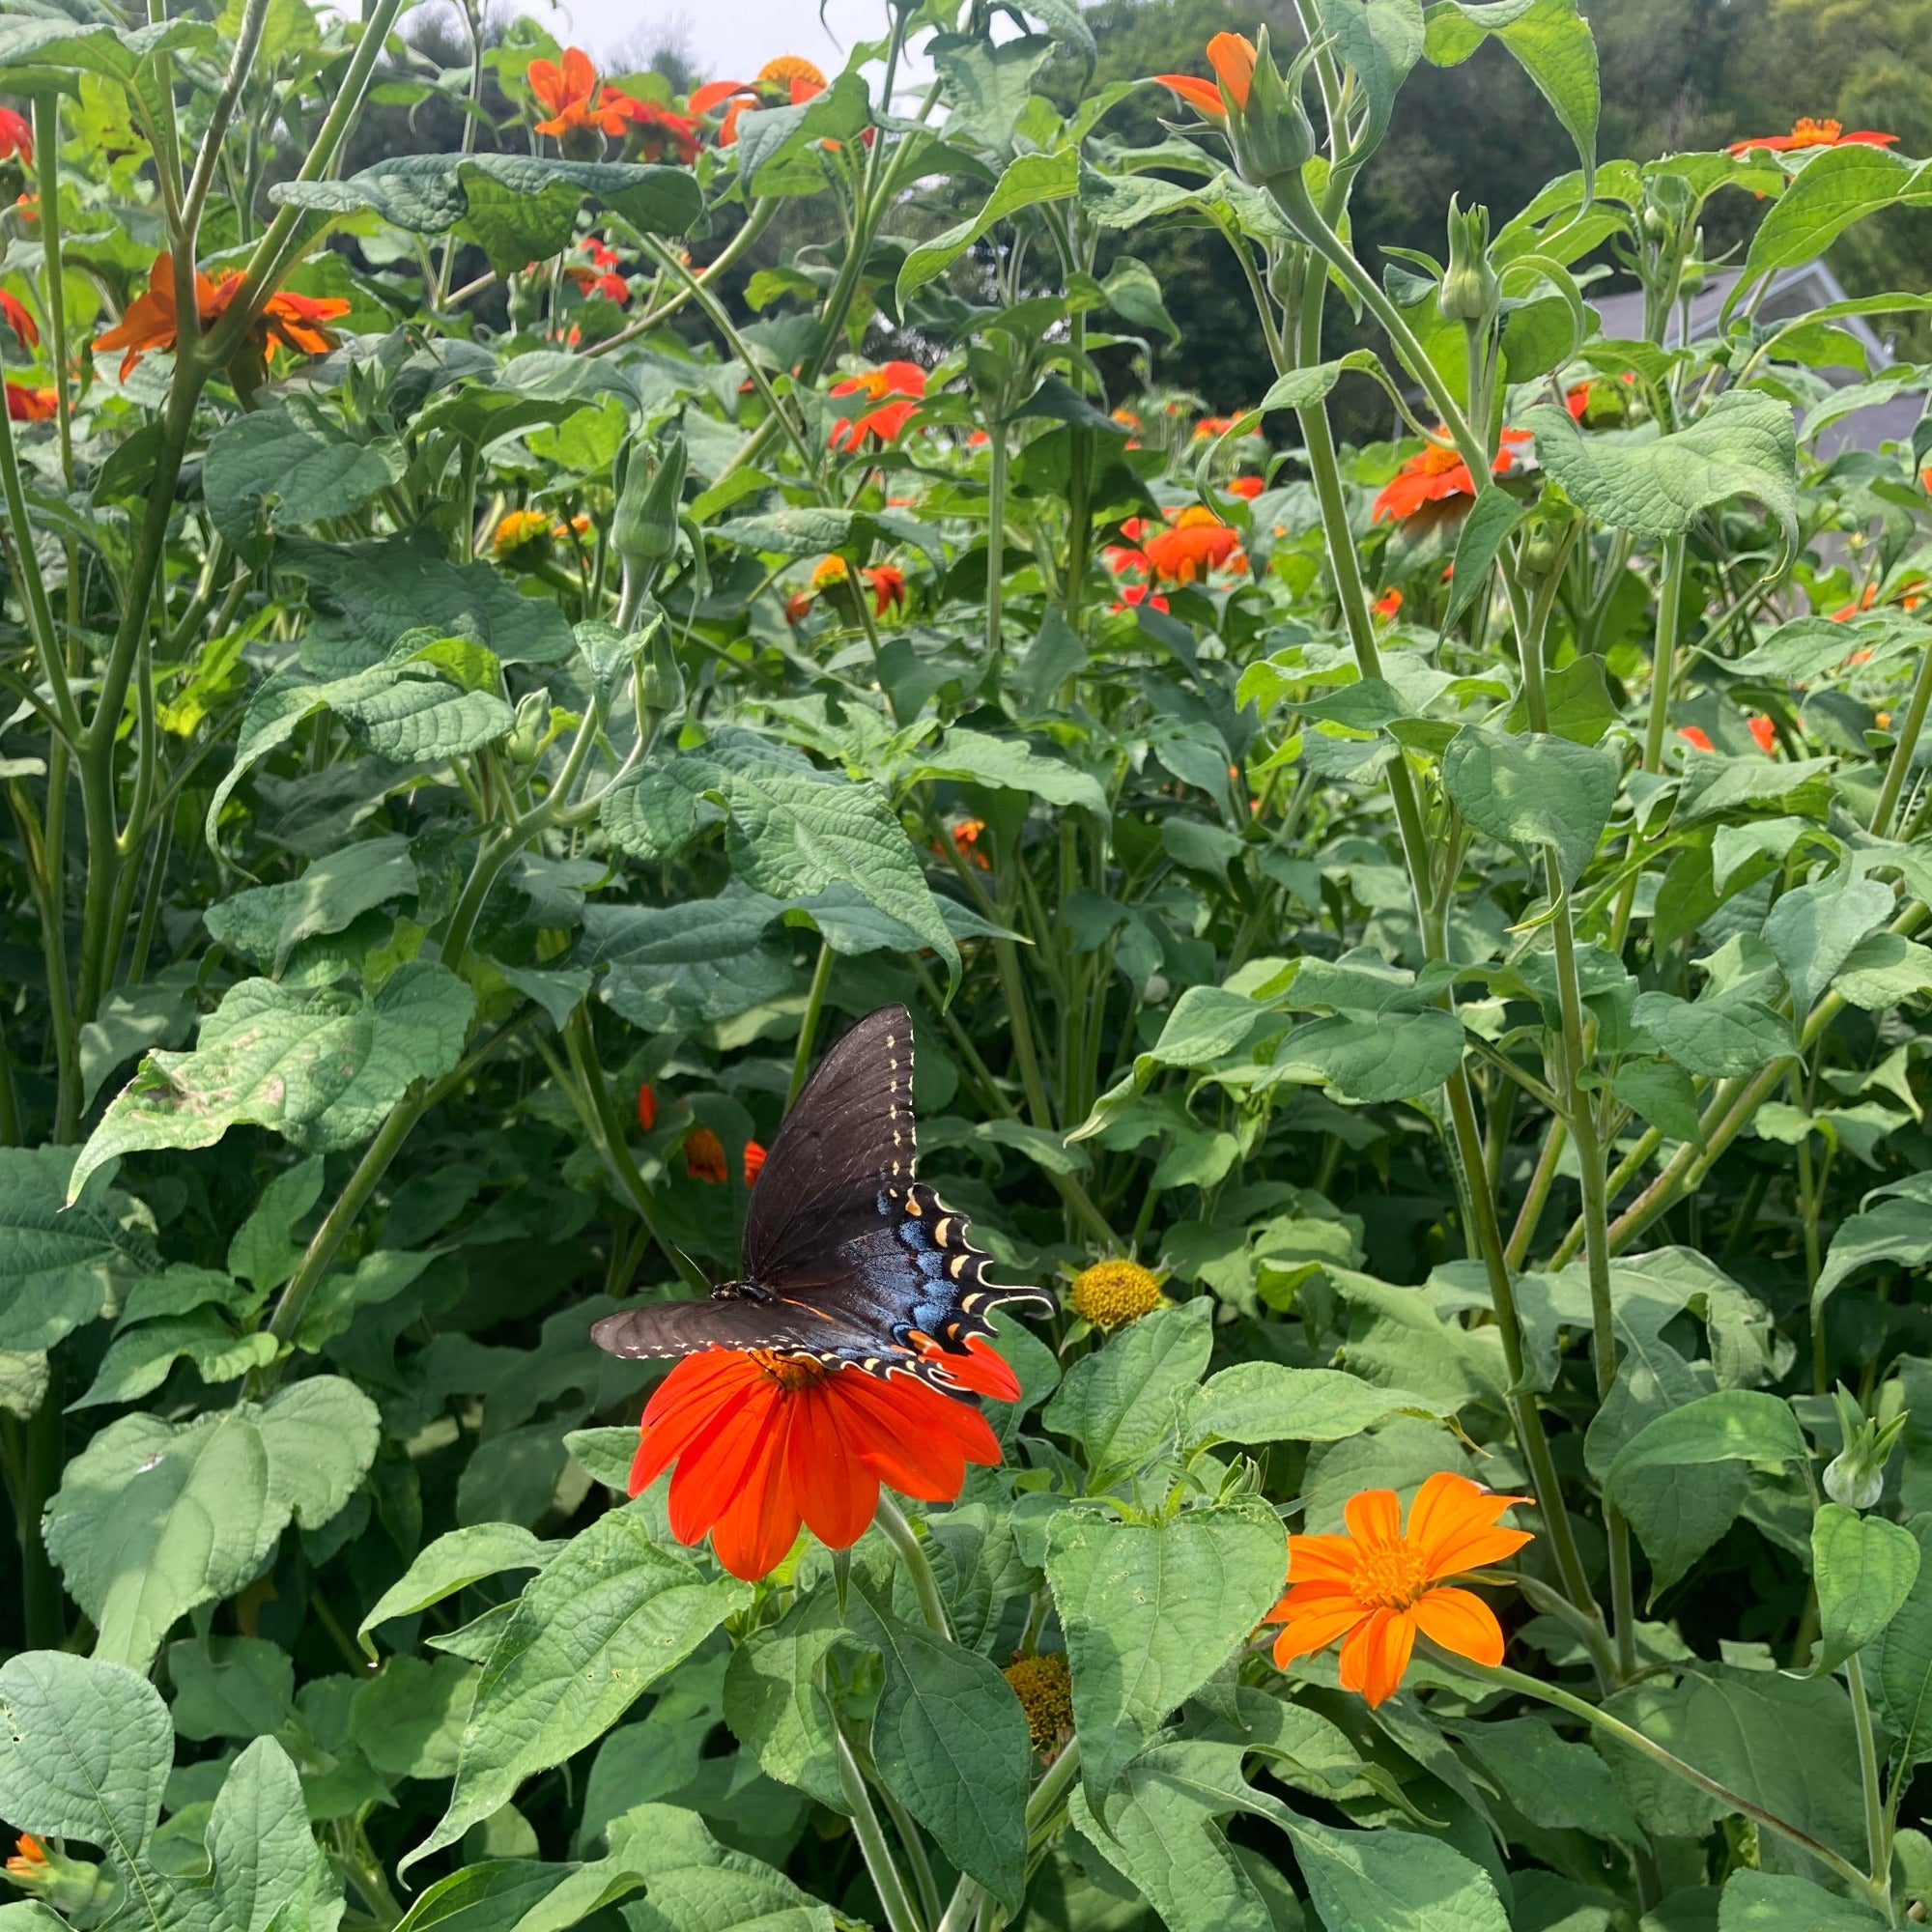 A picture of a dark morph swallowtail butterfly on a tithonia bloom